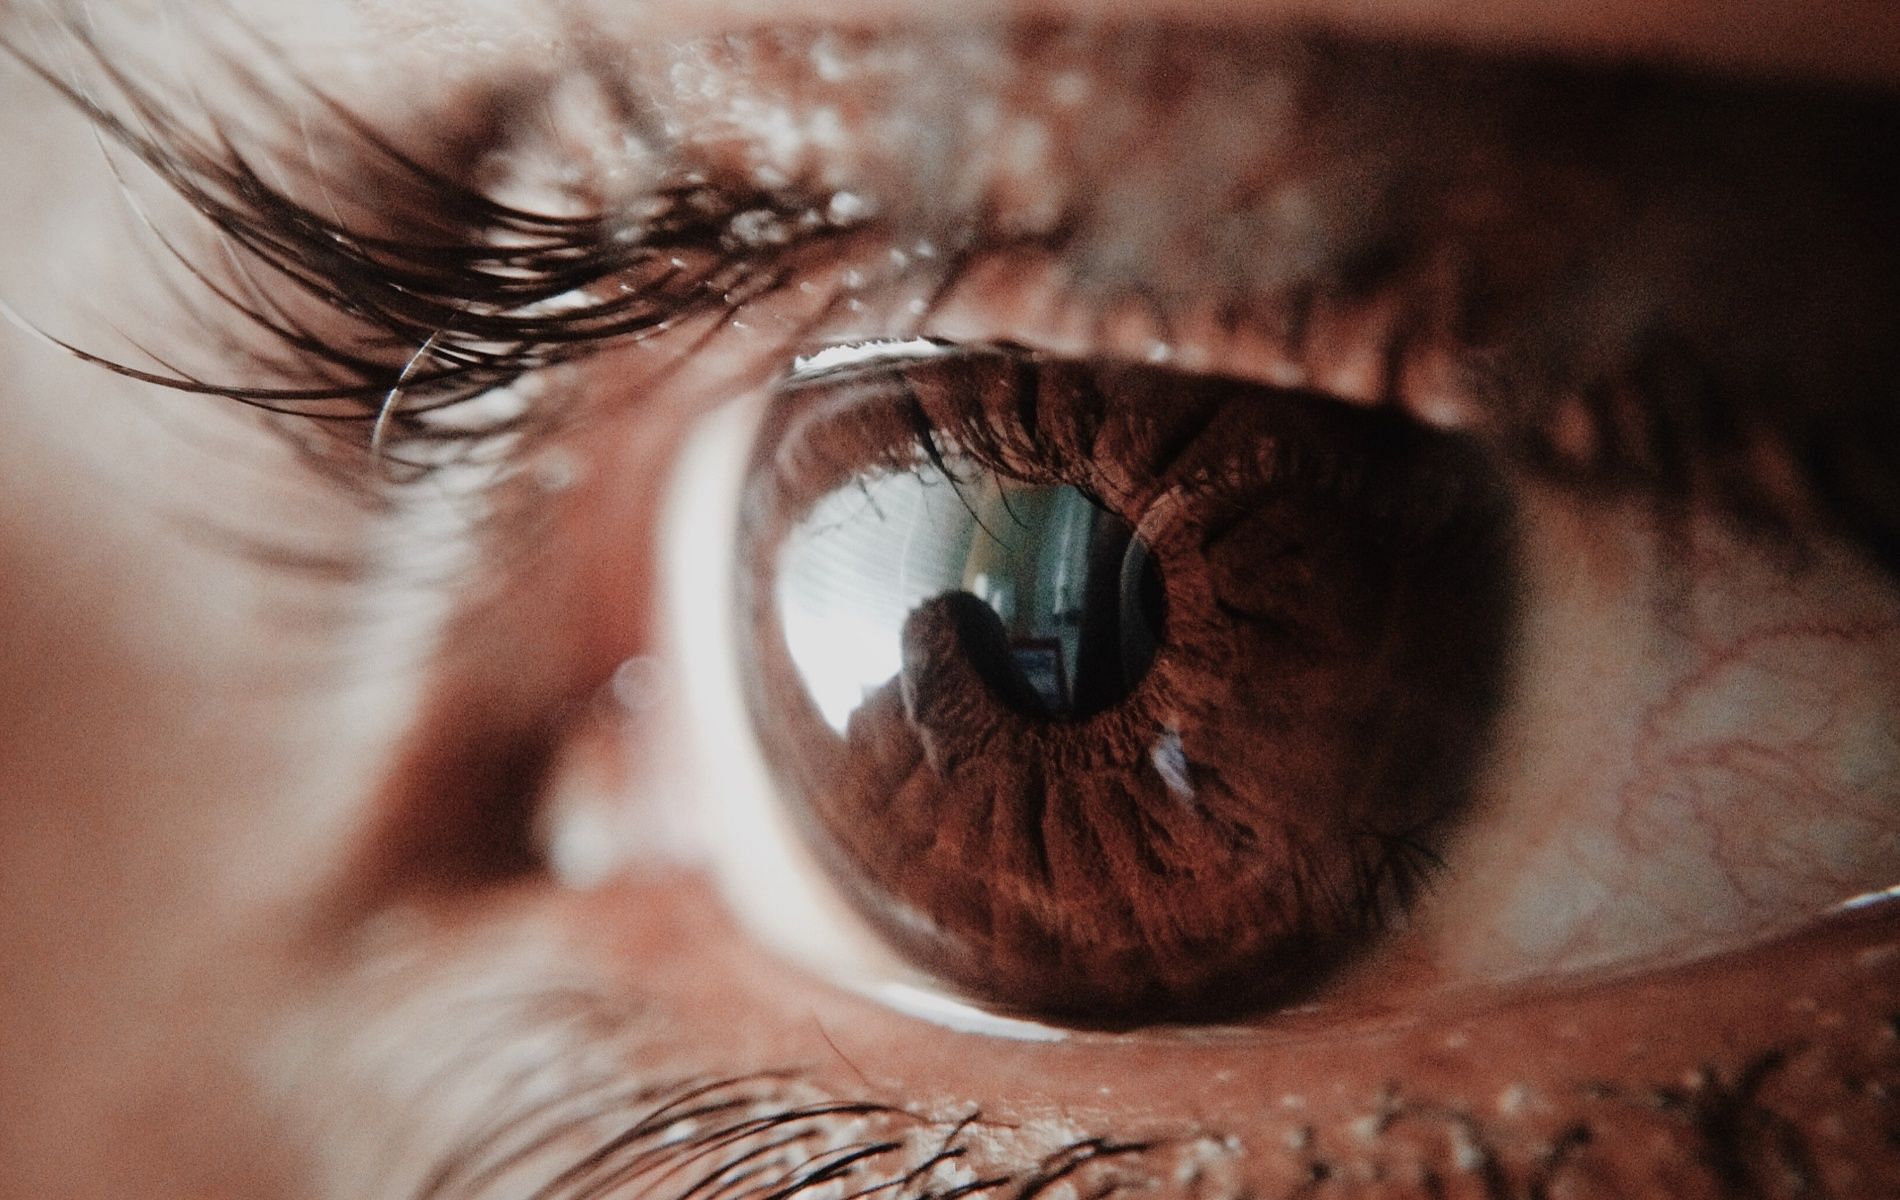 Protecting against retinal degeneration is one of the biggest benefits of taurine. (Image by Subin via Pexels)